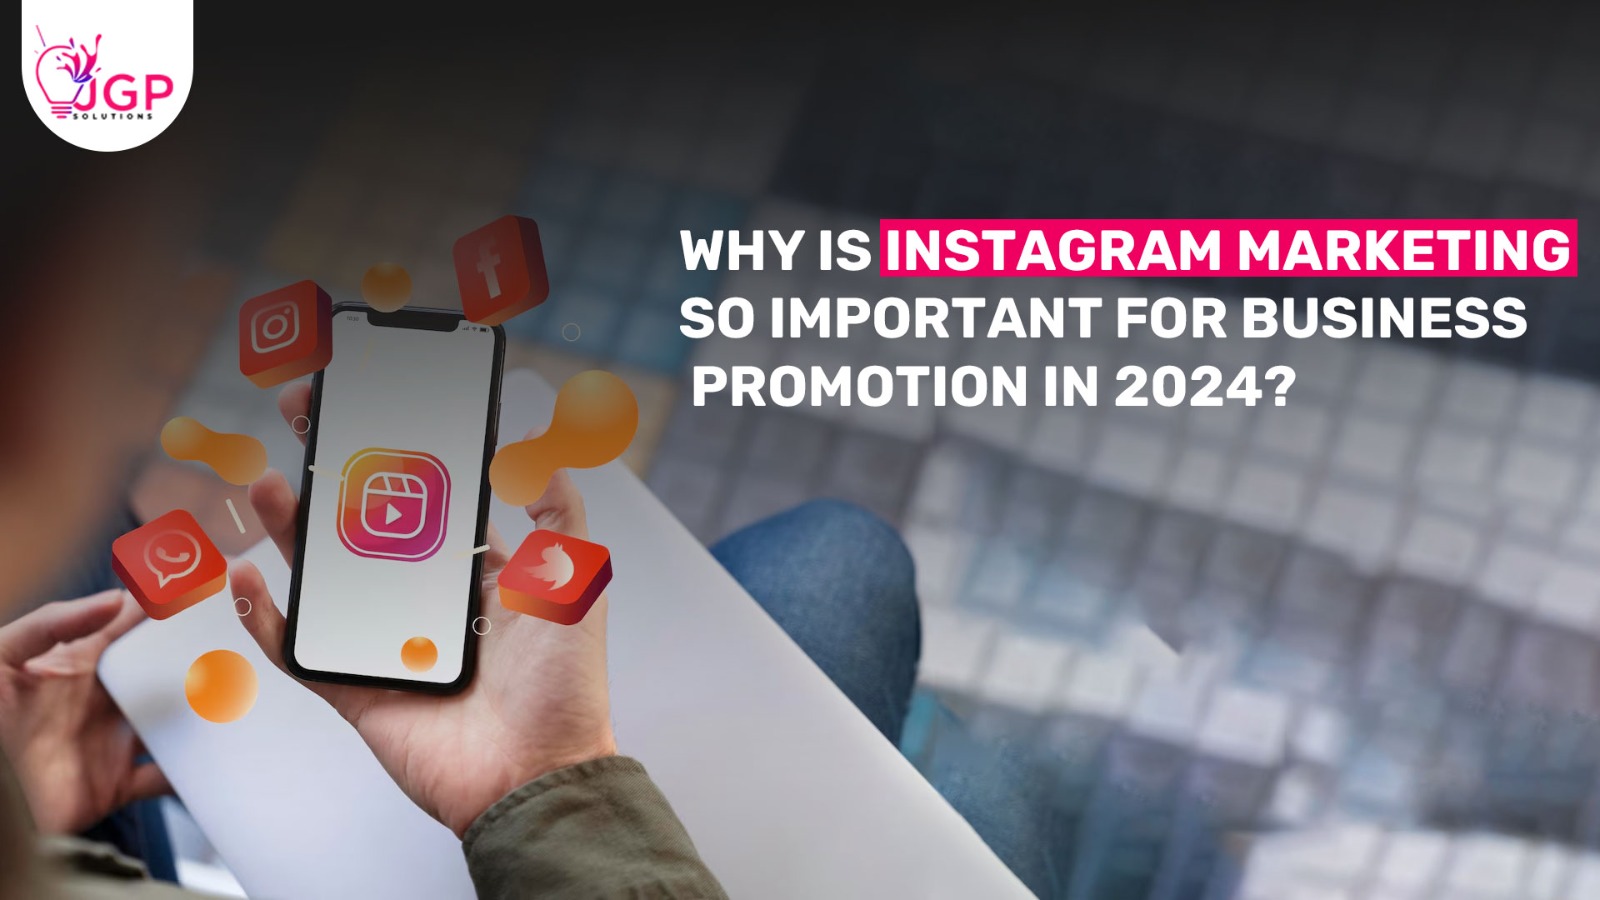 Why is Instagram marketing so important for business promotion in 2024?